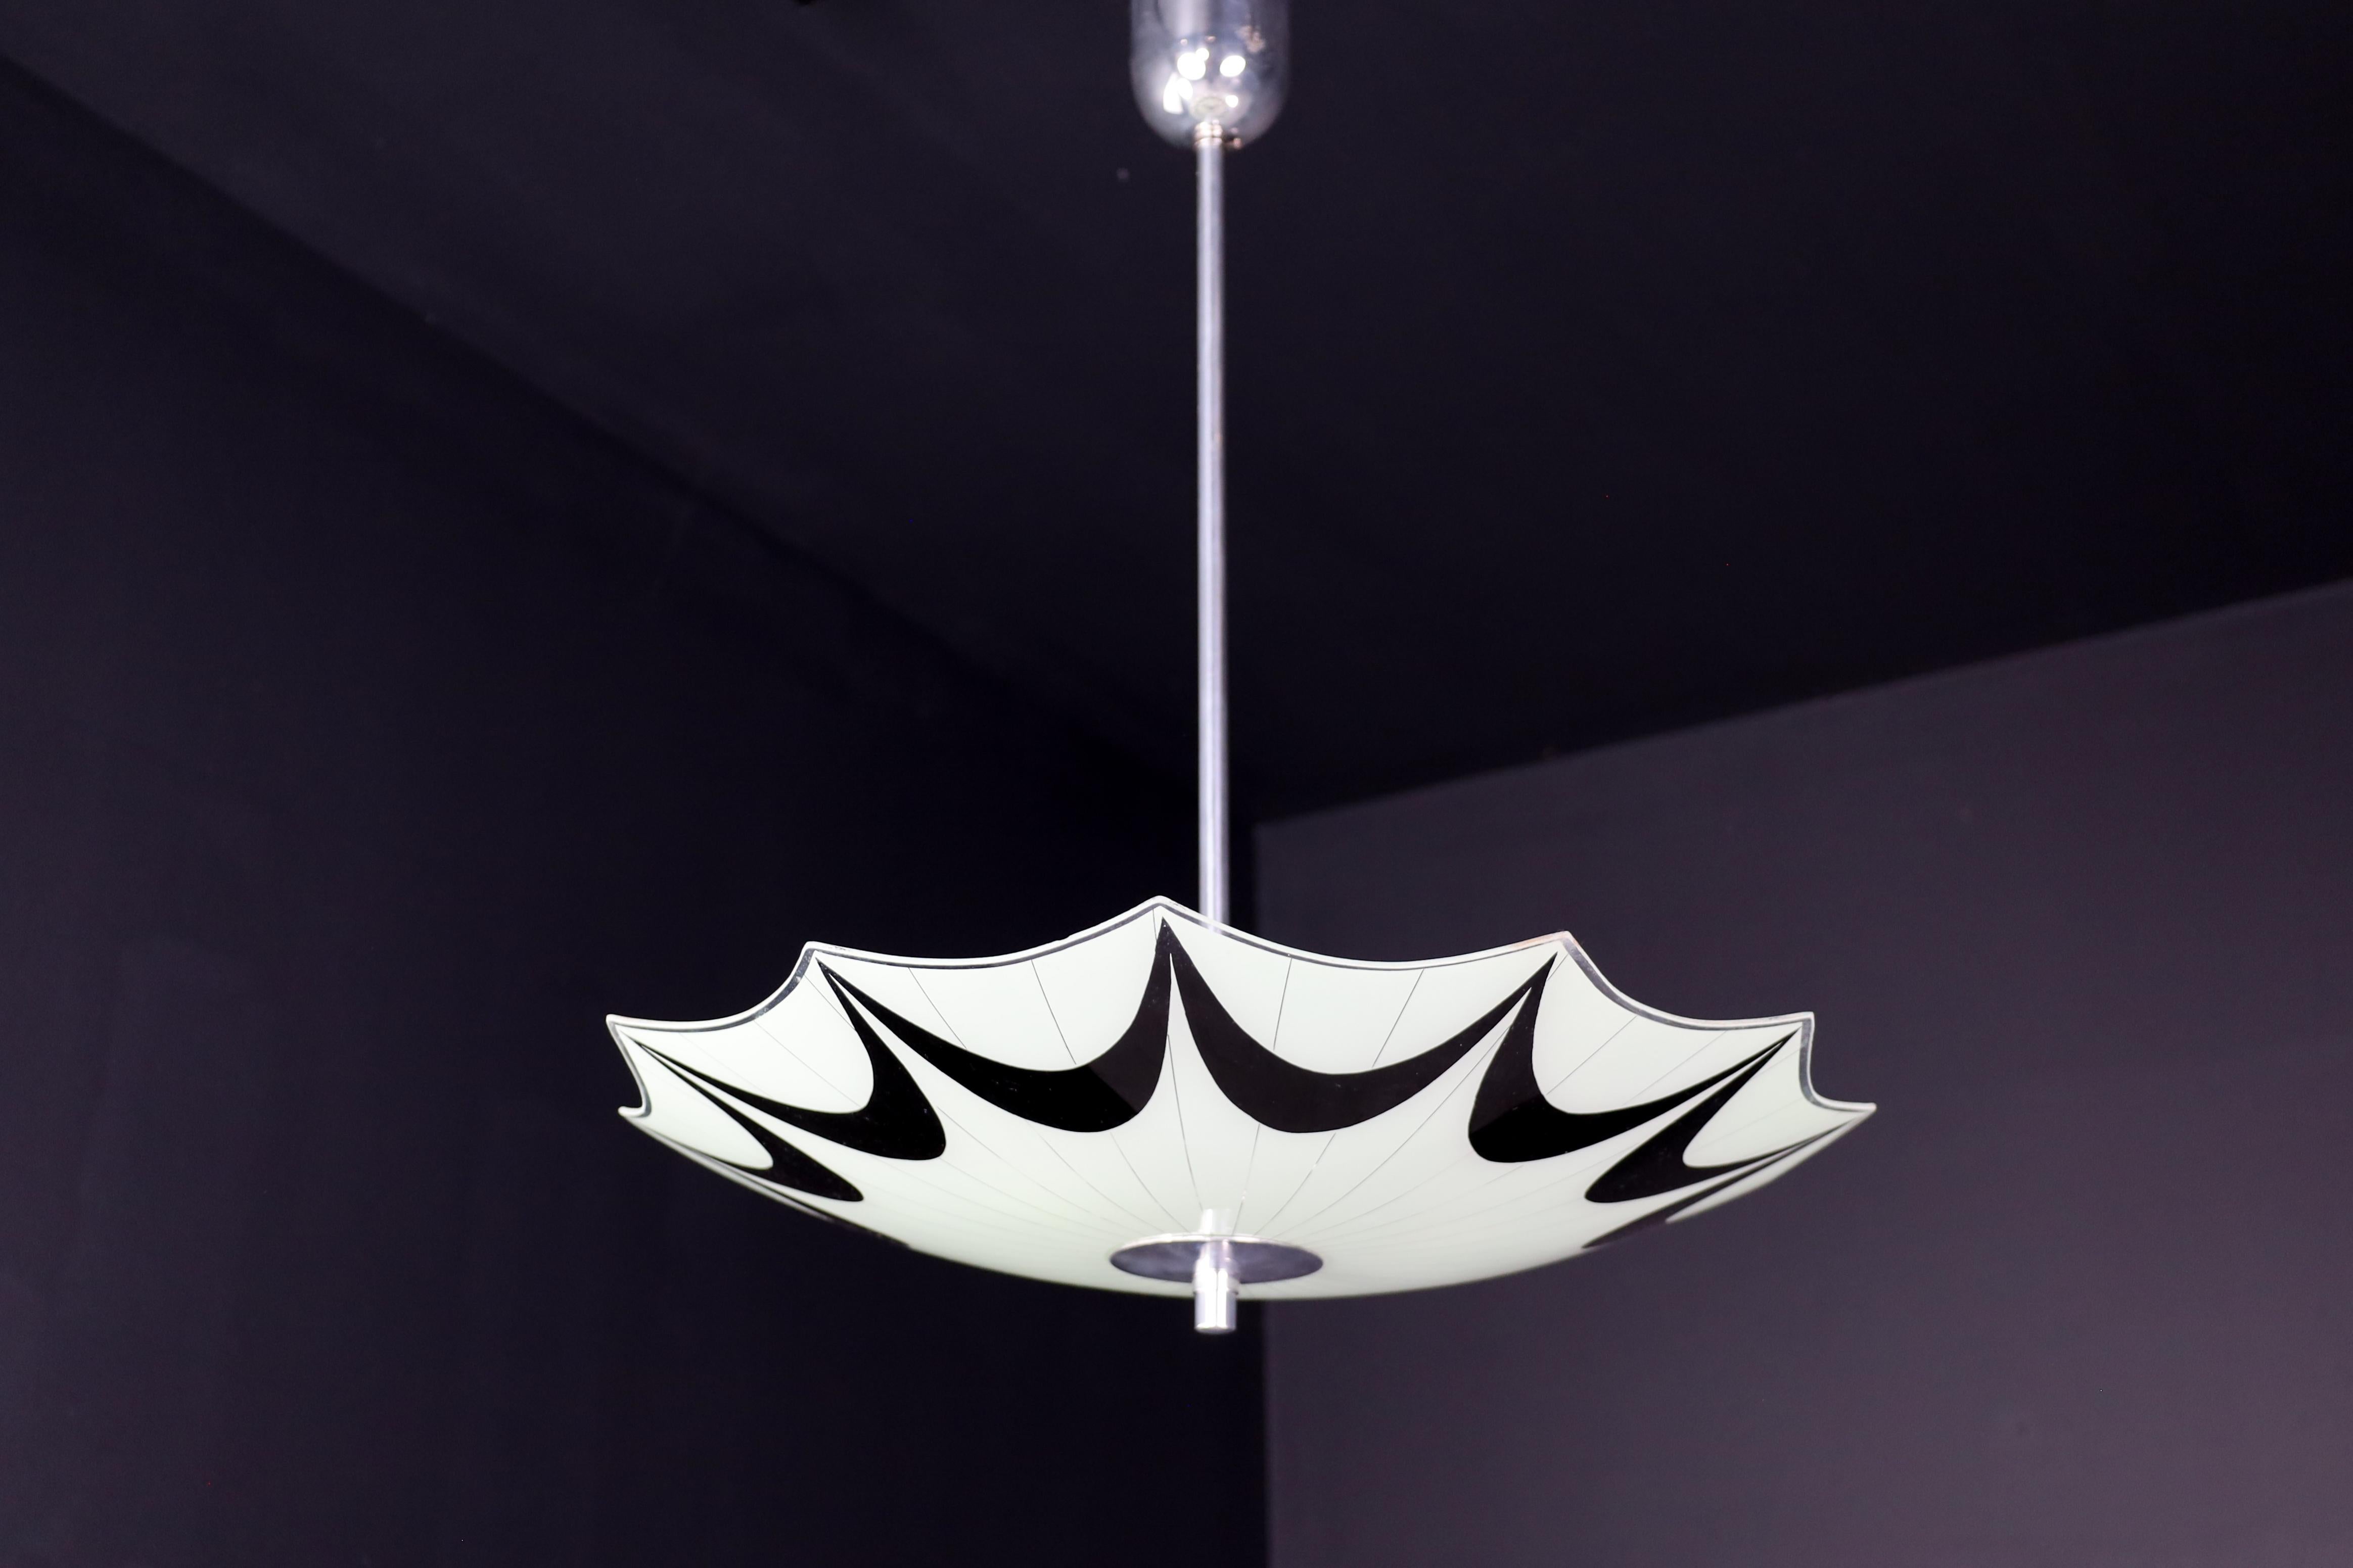 Czech Mid-Century Glass Hanging Pendant Lamp Brussels World Expo 1958 